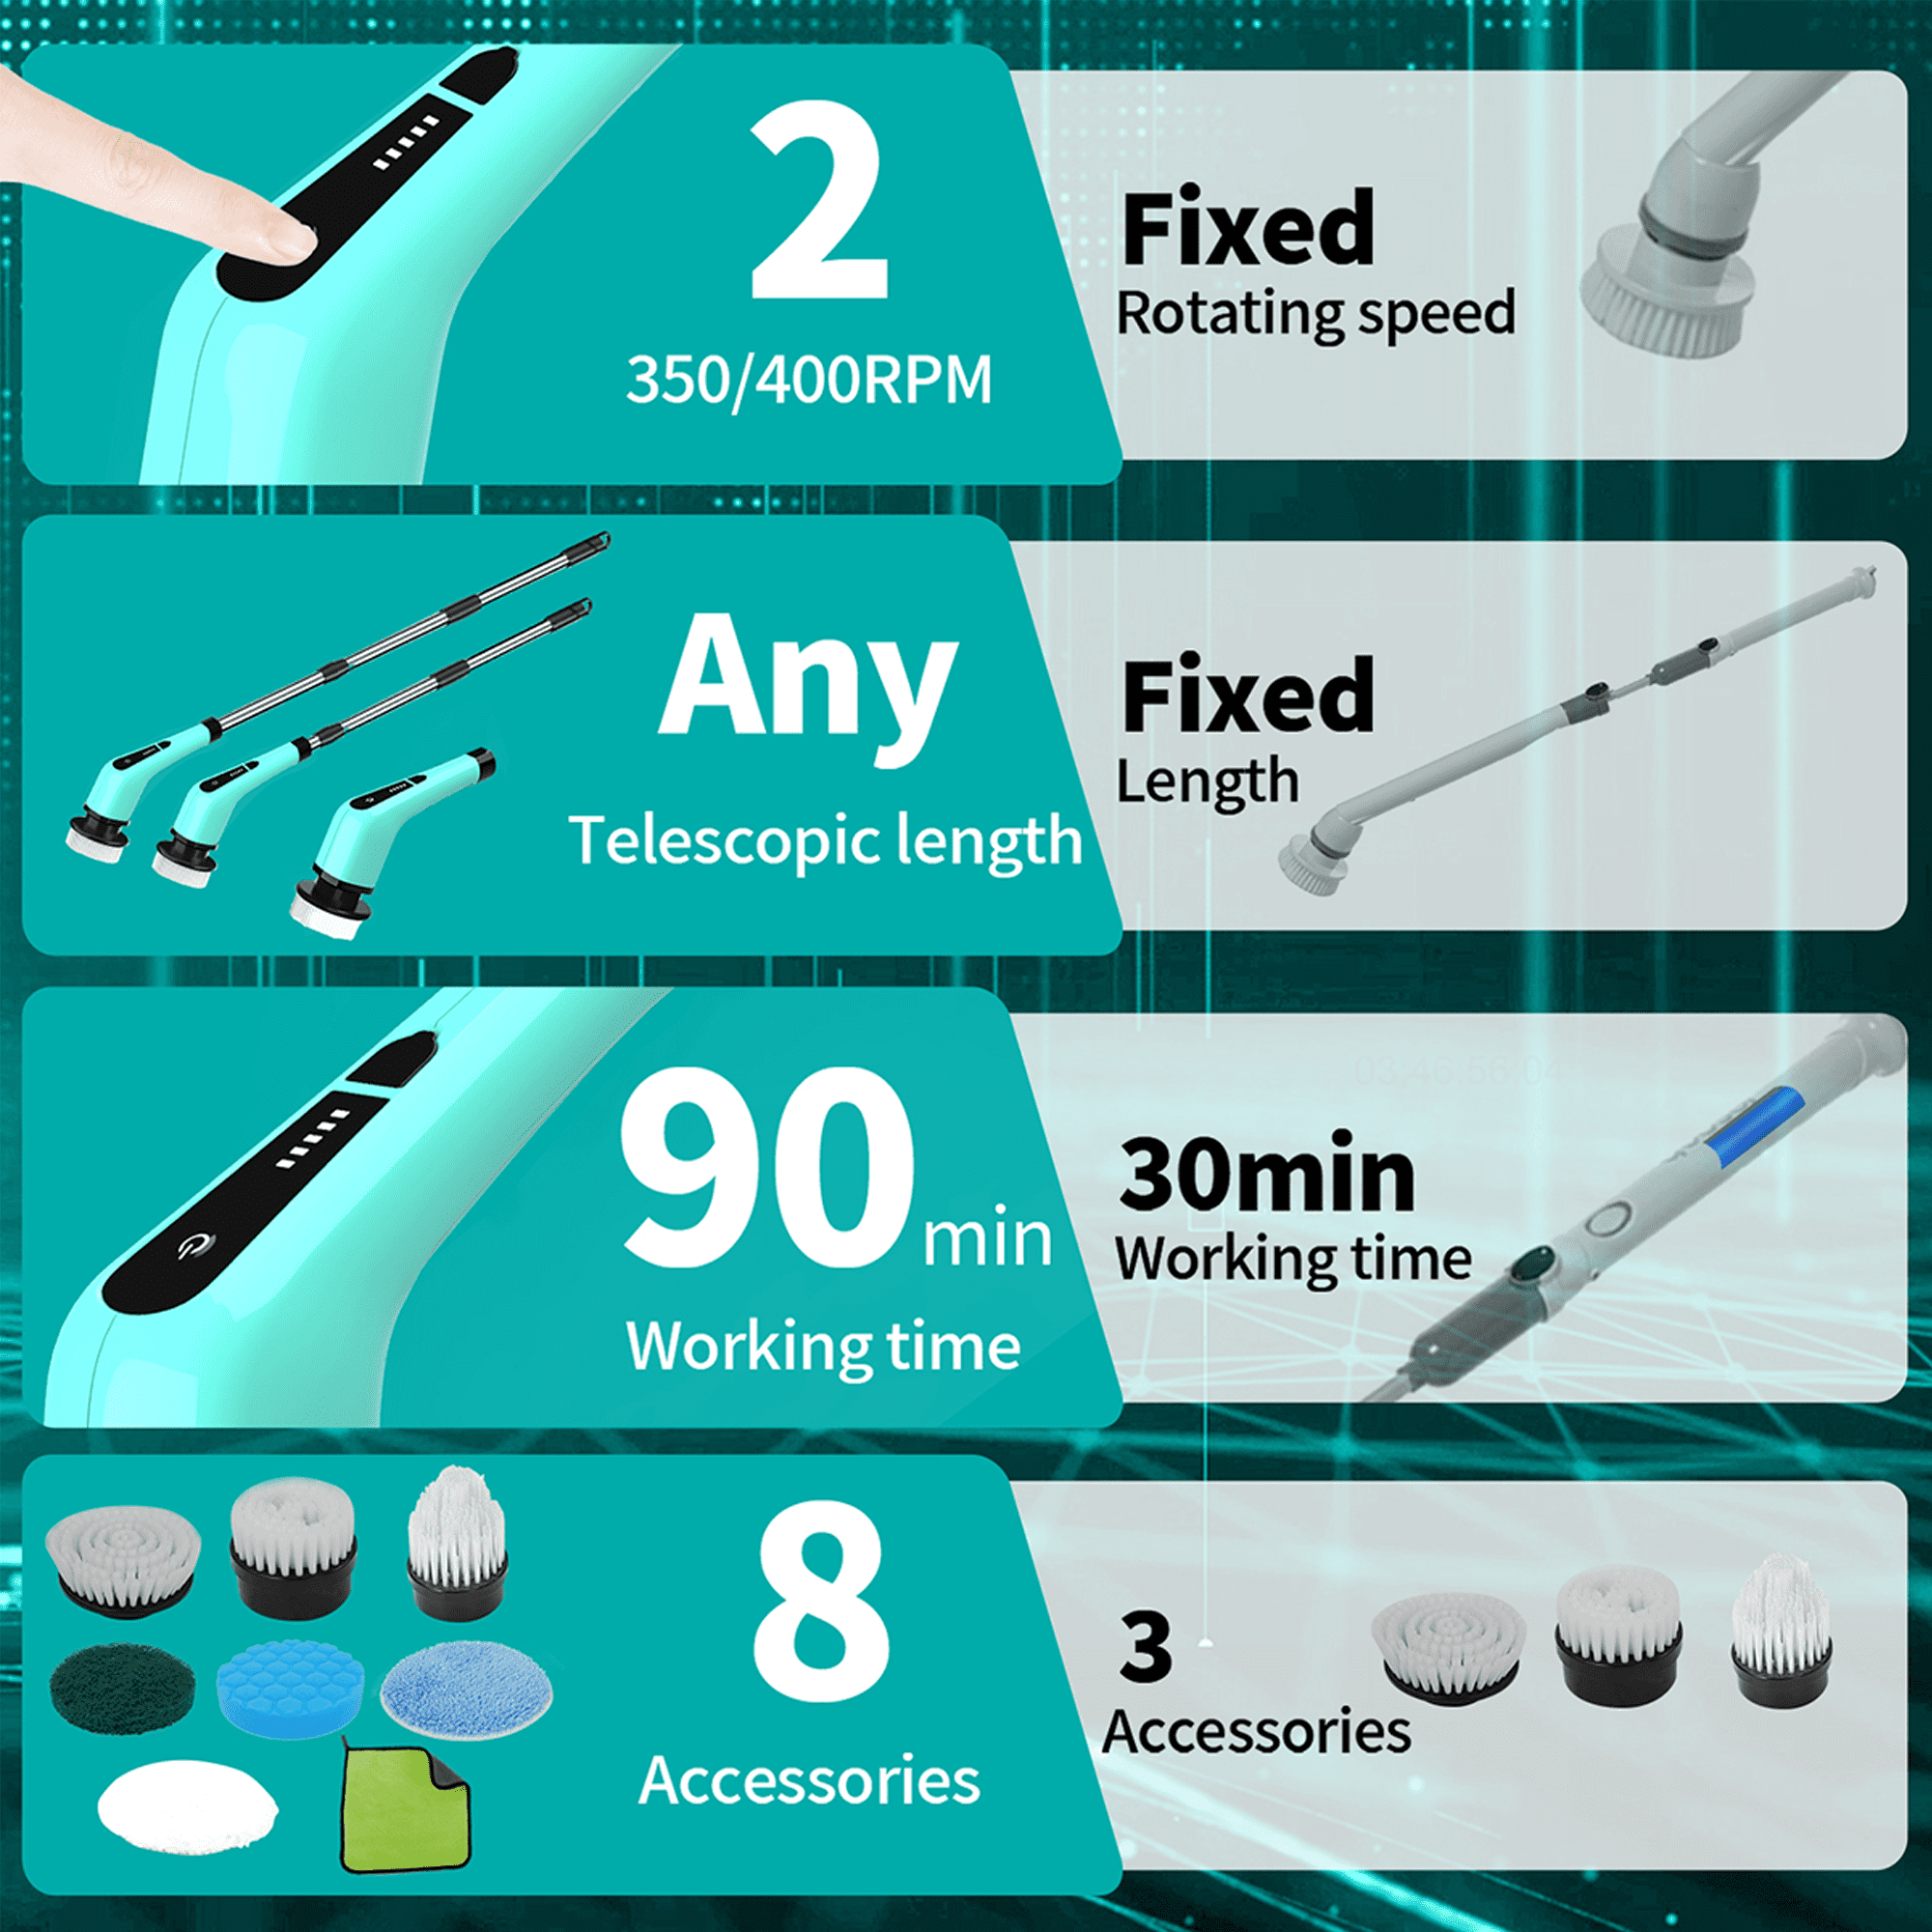 Electric Spin Scrubber, Handheld Power Scrubber with 4 Replaceable Brush  Heads & 2 Rotating Speeds, Portable Bathroom Cleaner Brush for Cleaning  Bathtub Tile Floor Kitchen Sink Window..$ 49.99 Free for USA 🇺🇸